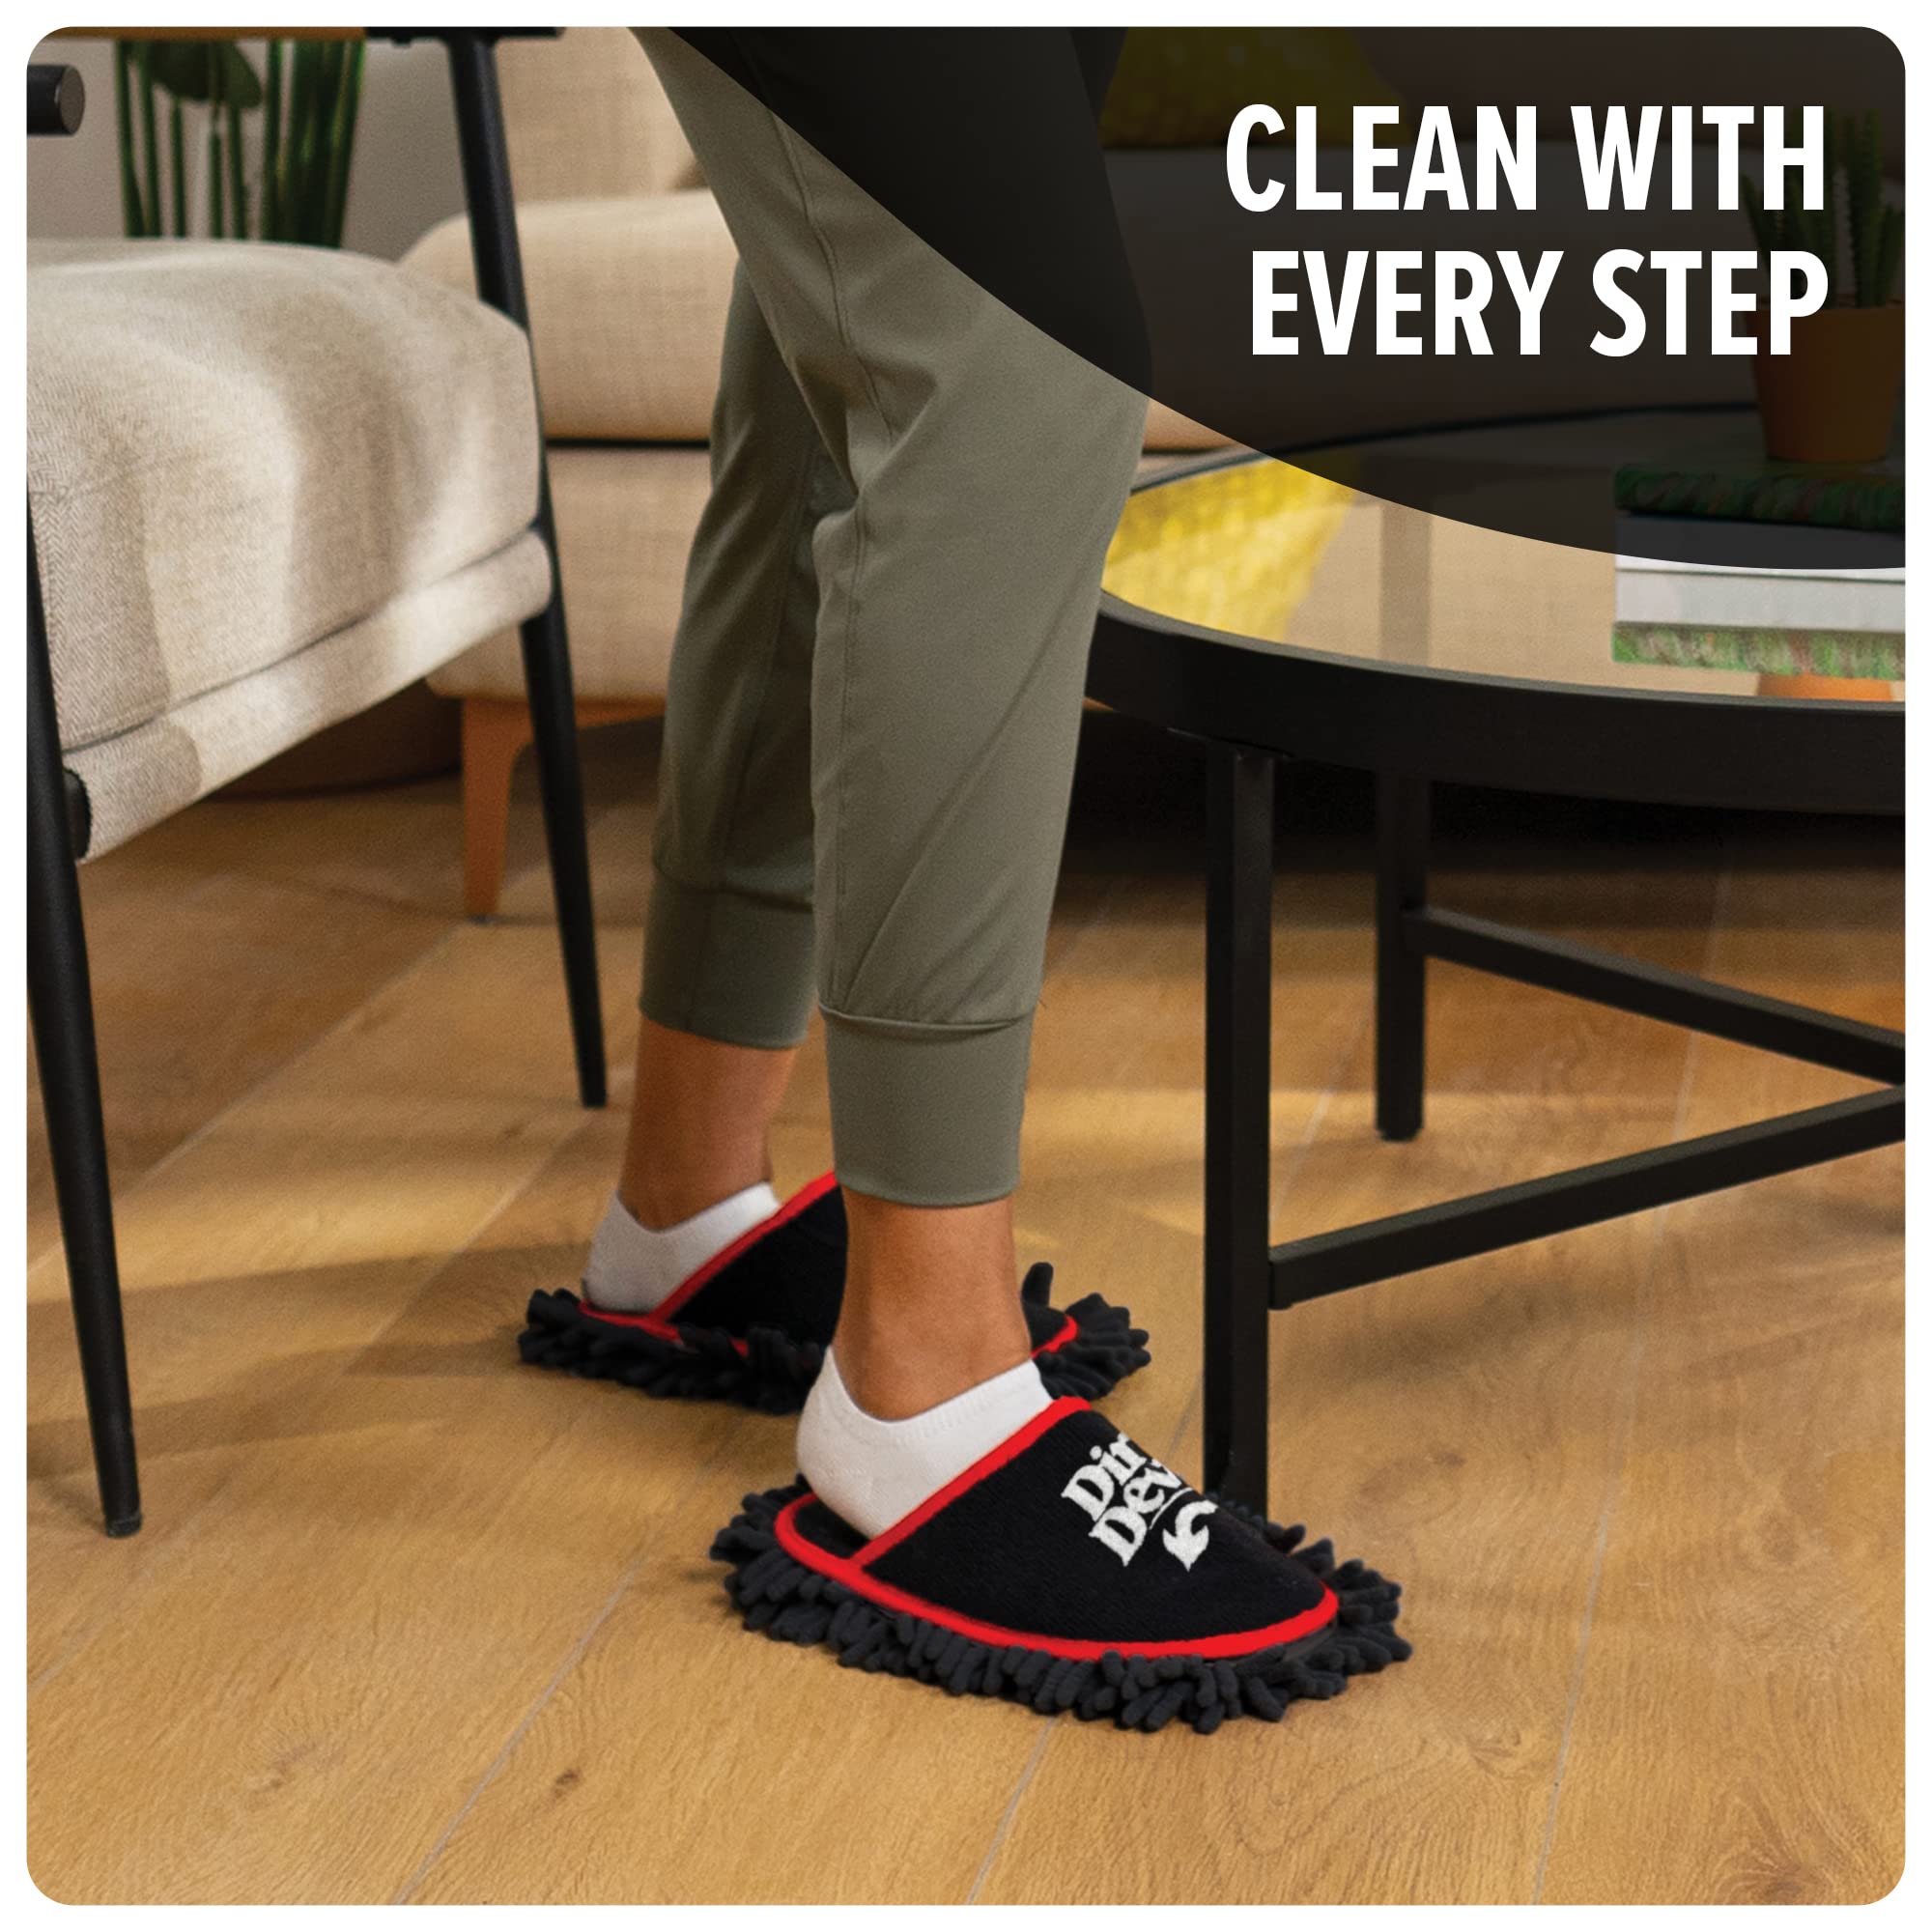 Dirt Devil Cleaning Slippers, Microfiber Washable Dusting Shoes, for Floor, Hair, House and Baseboards, MD95000, Black